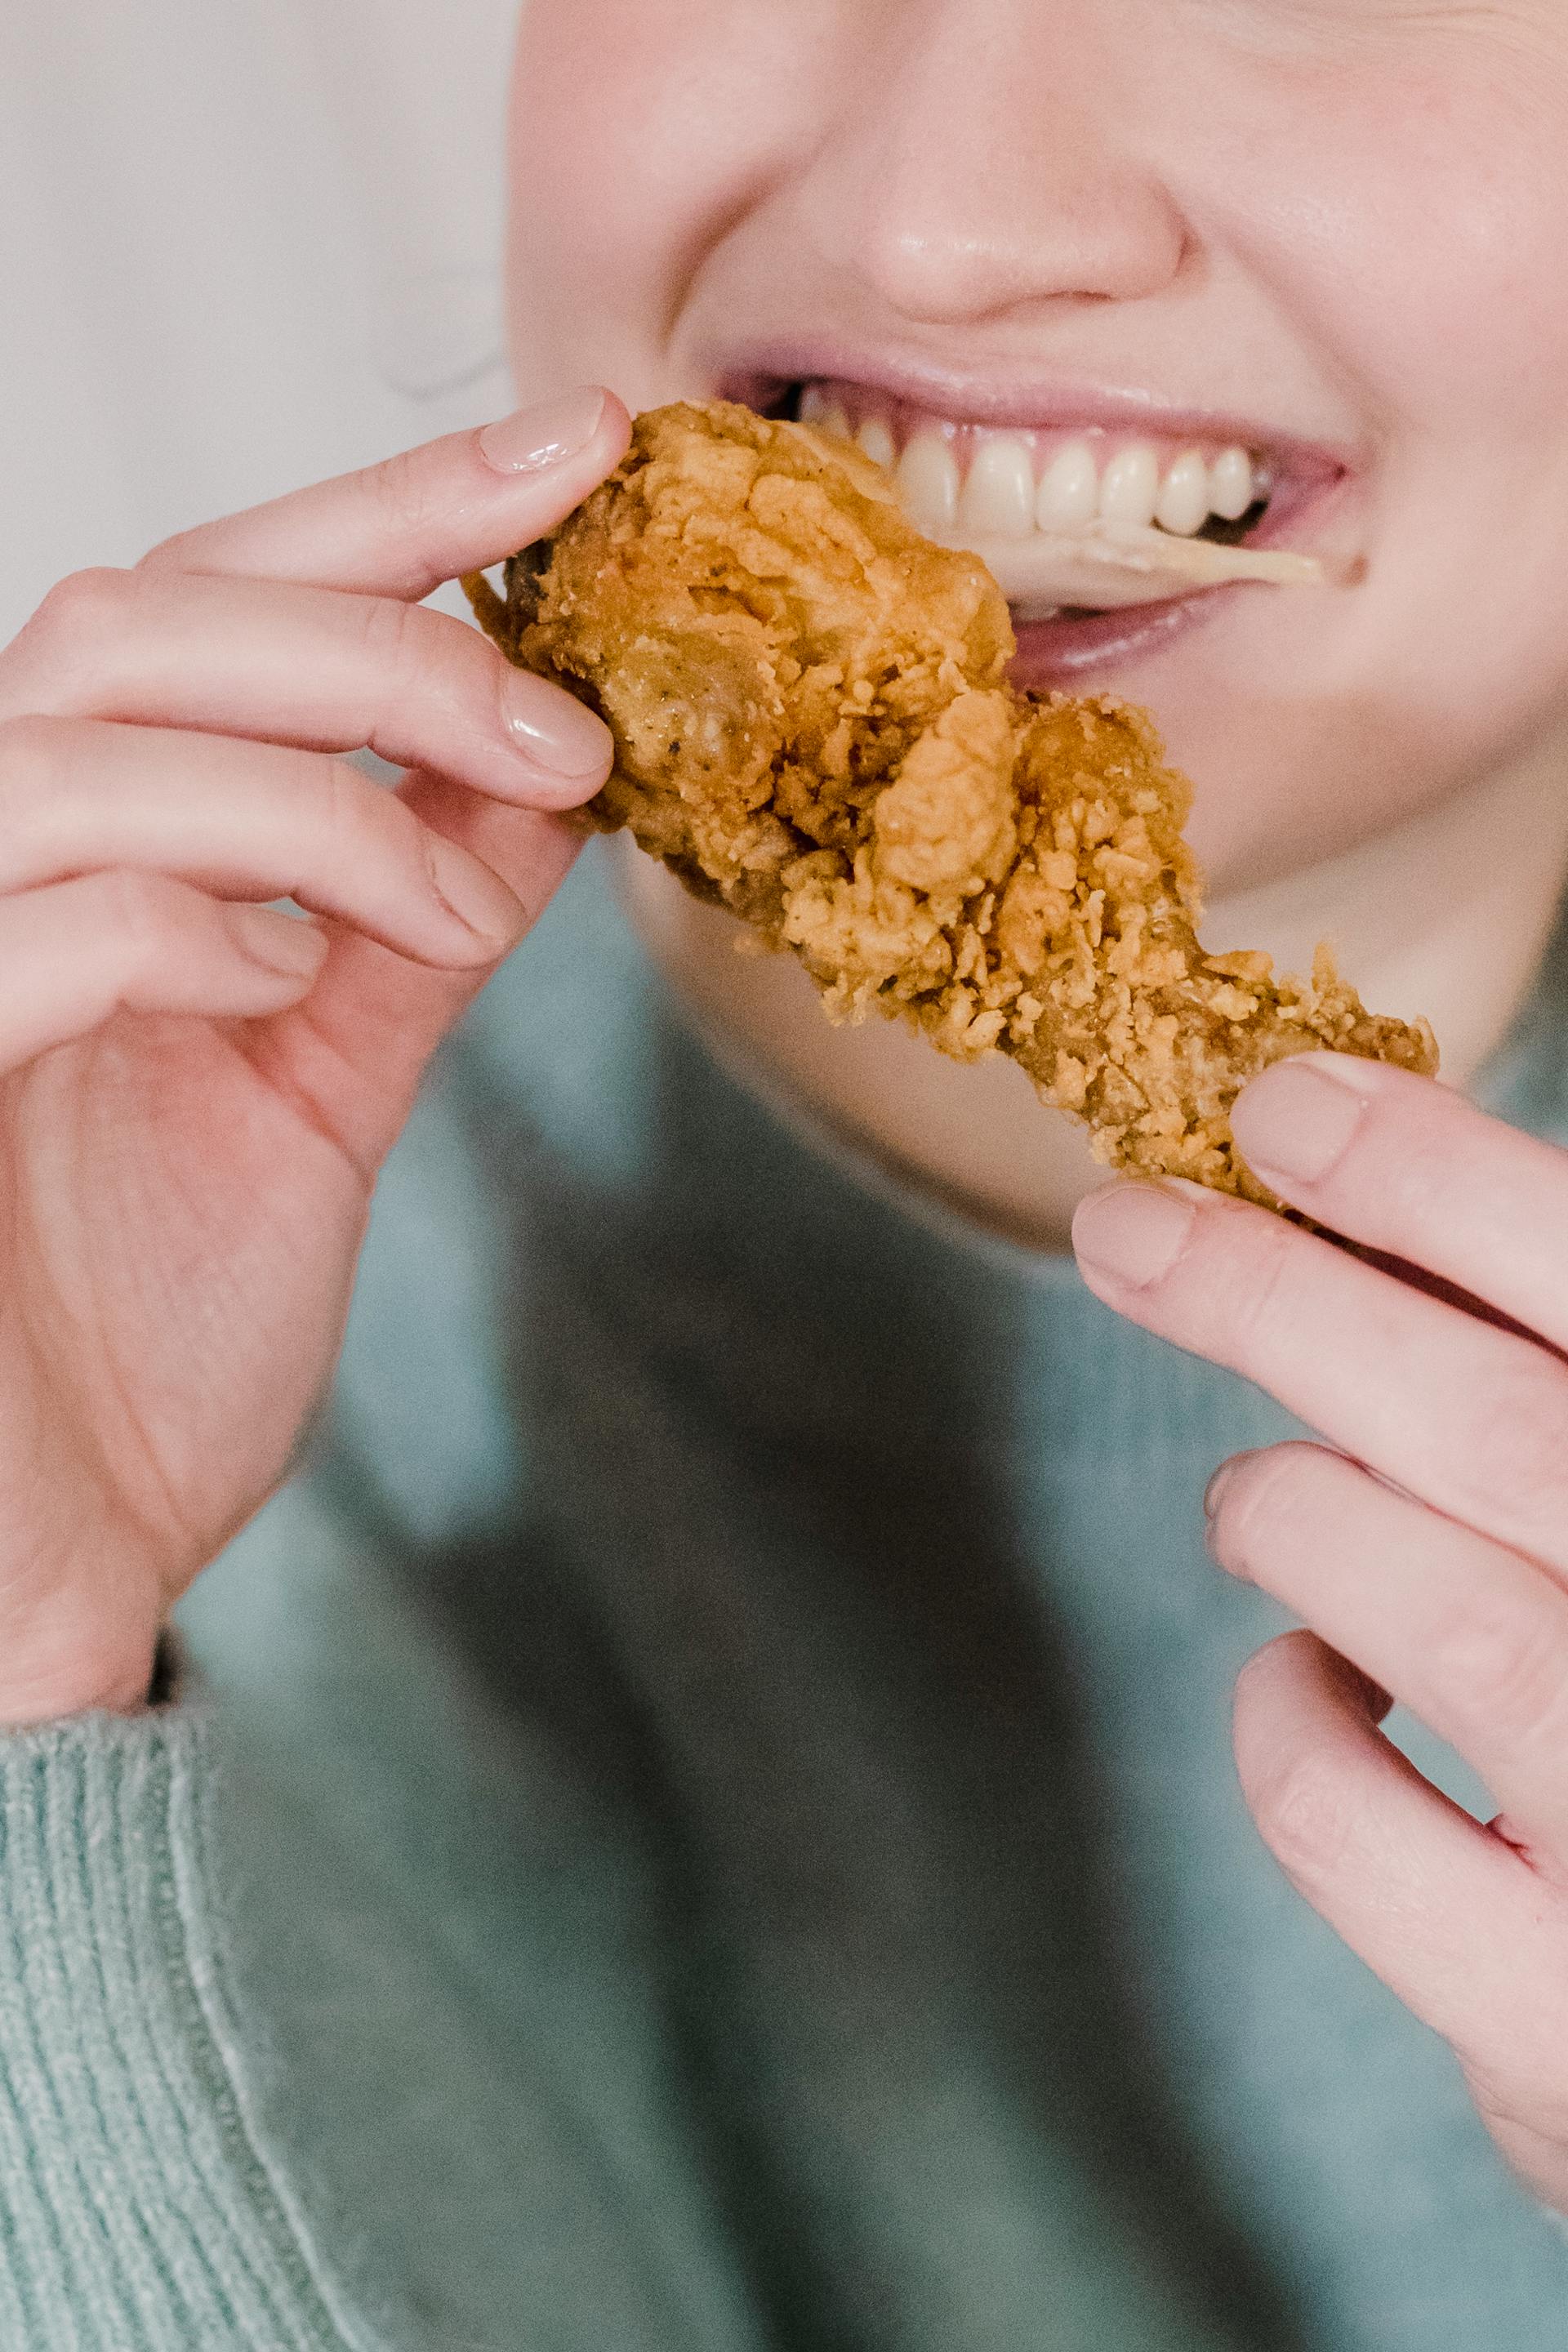 A person eating fried chicken | Source: Pexels